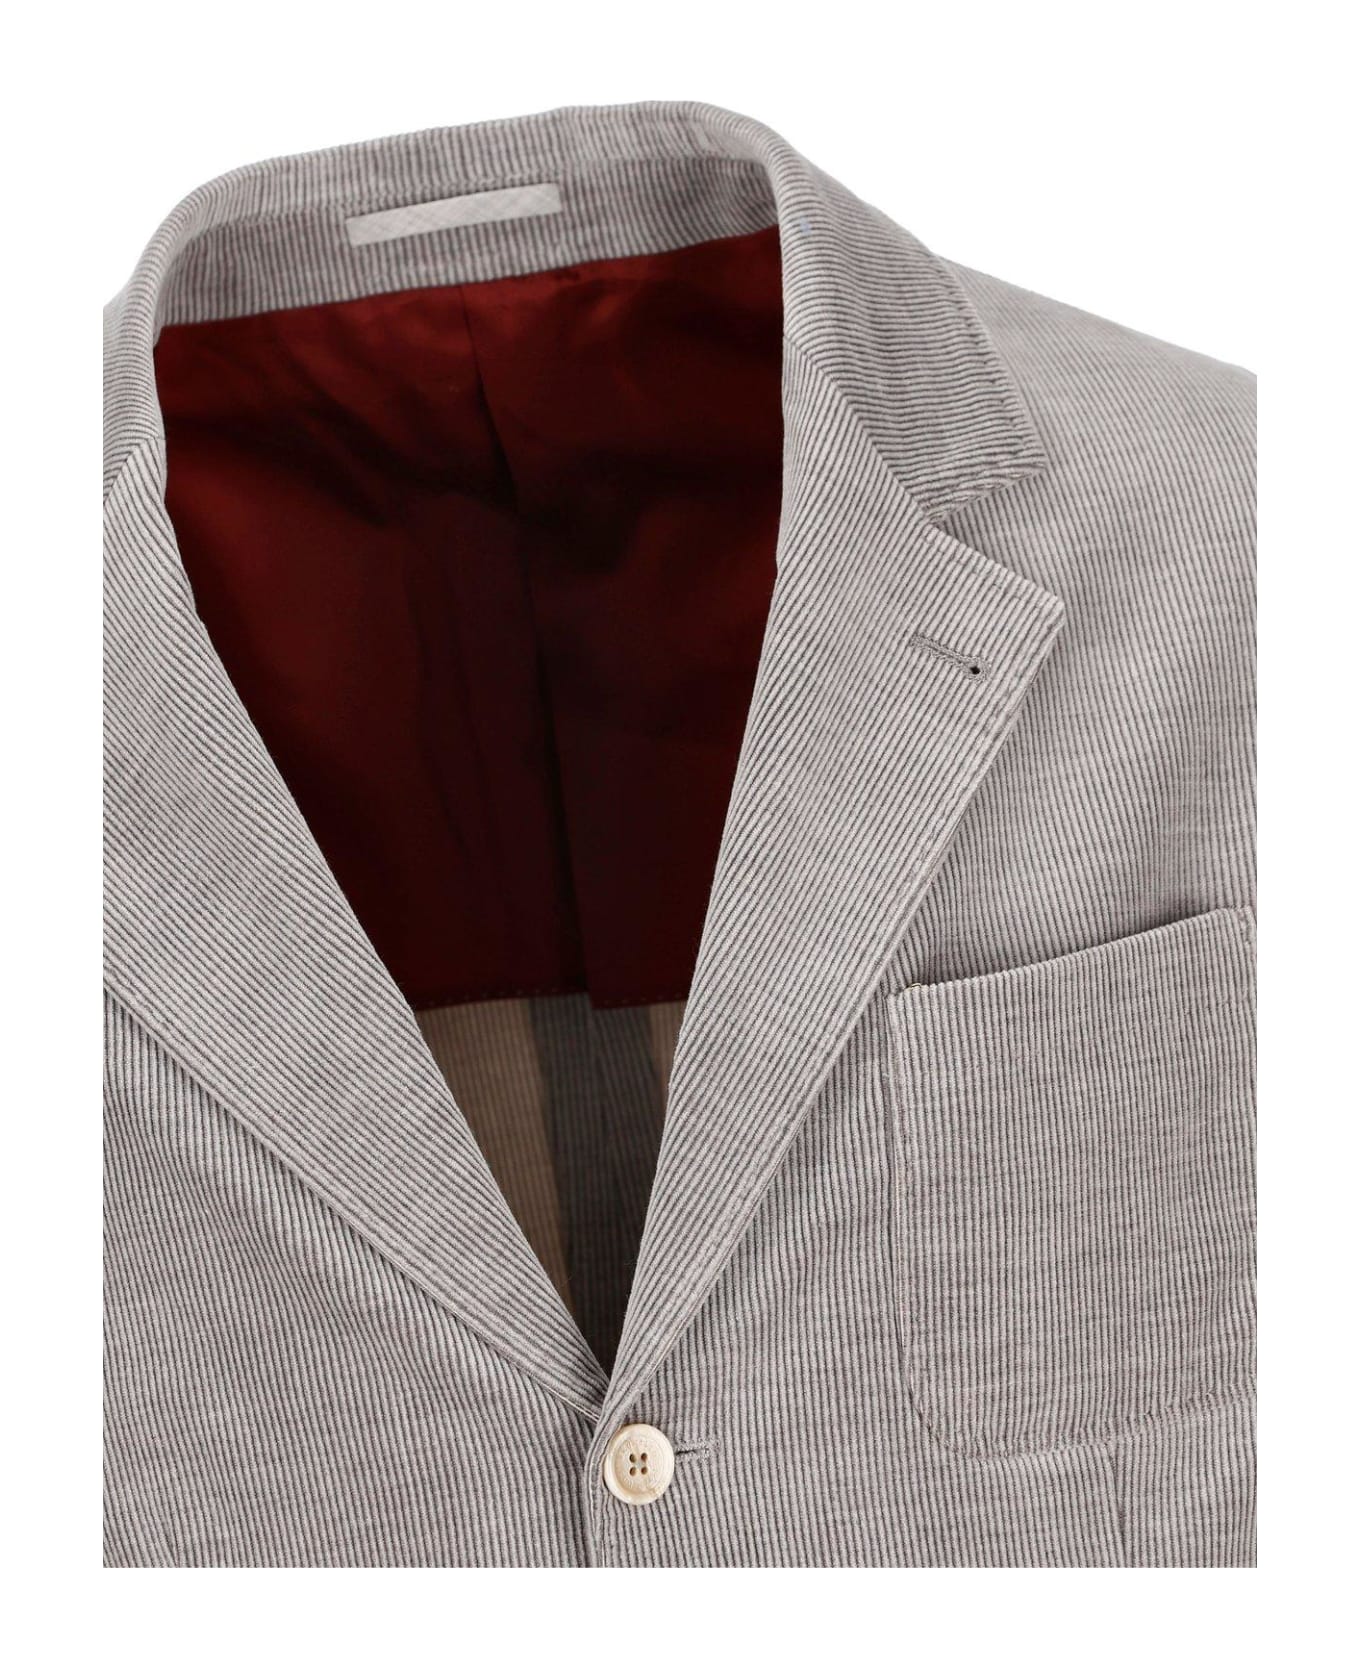 Brunello Cucinelli Two-piece Single-breasted Suit